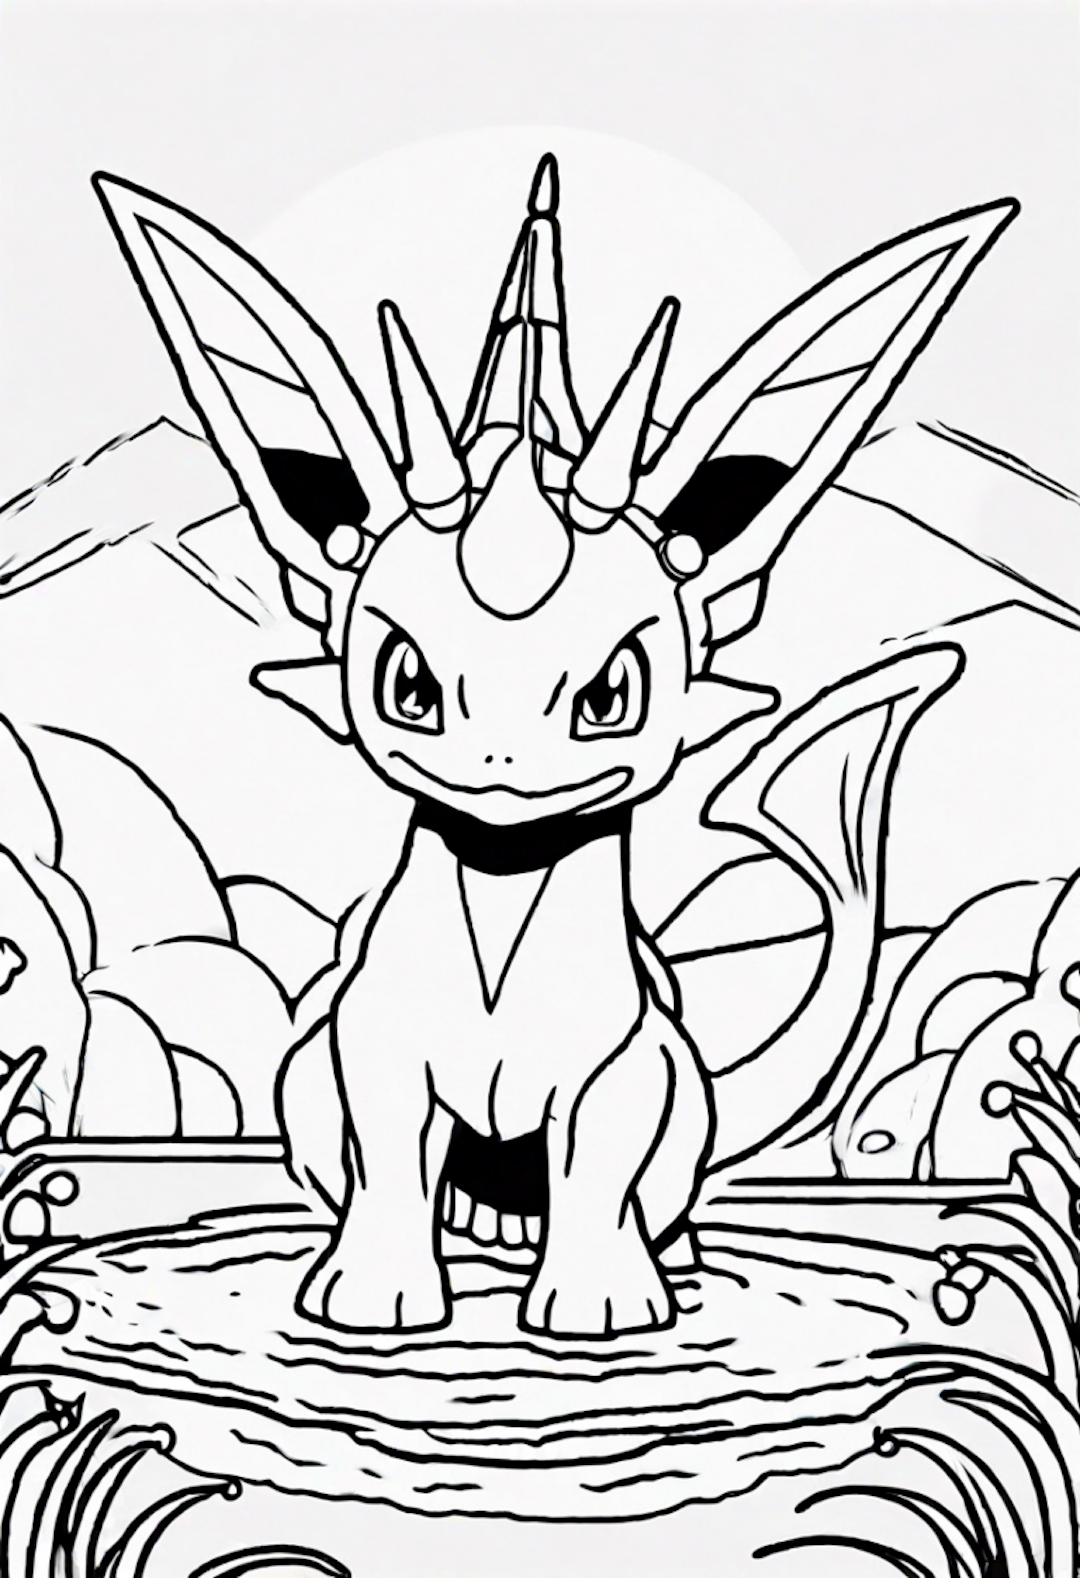 Vaporeon coloring pages